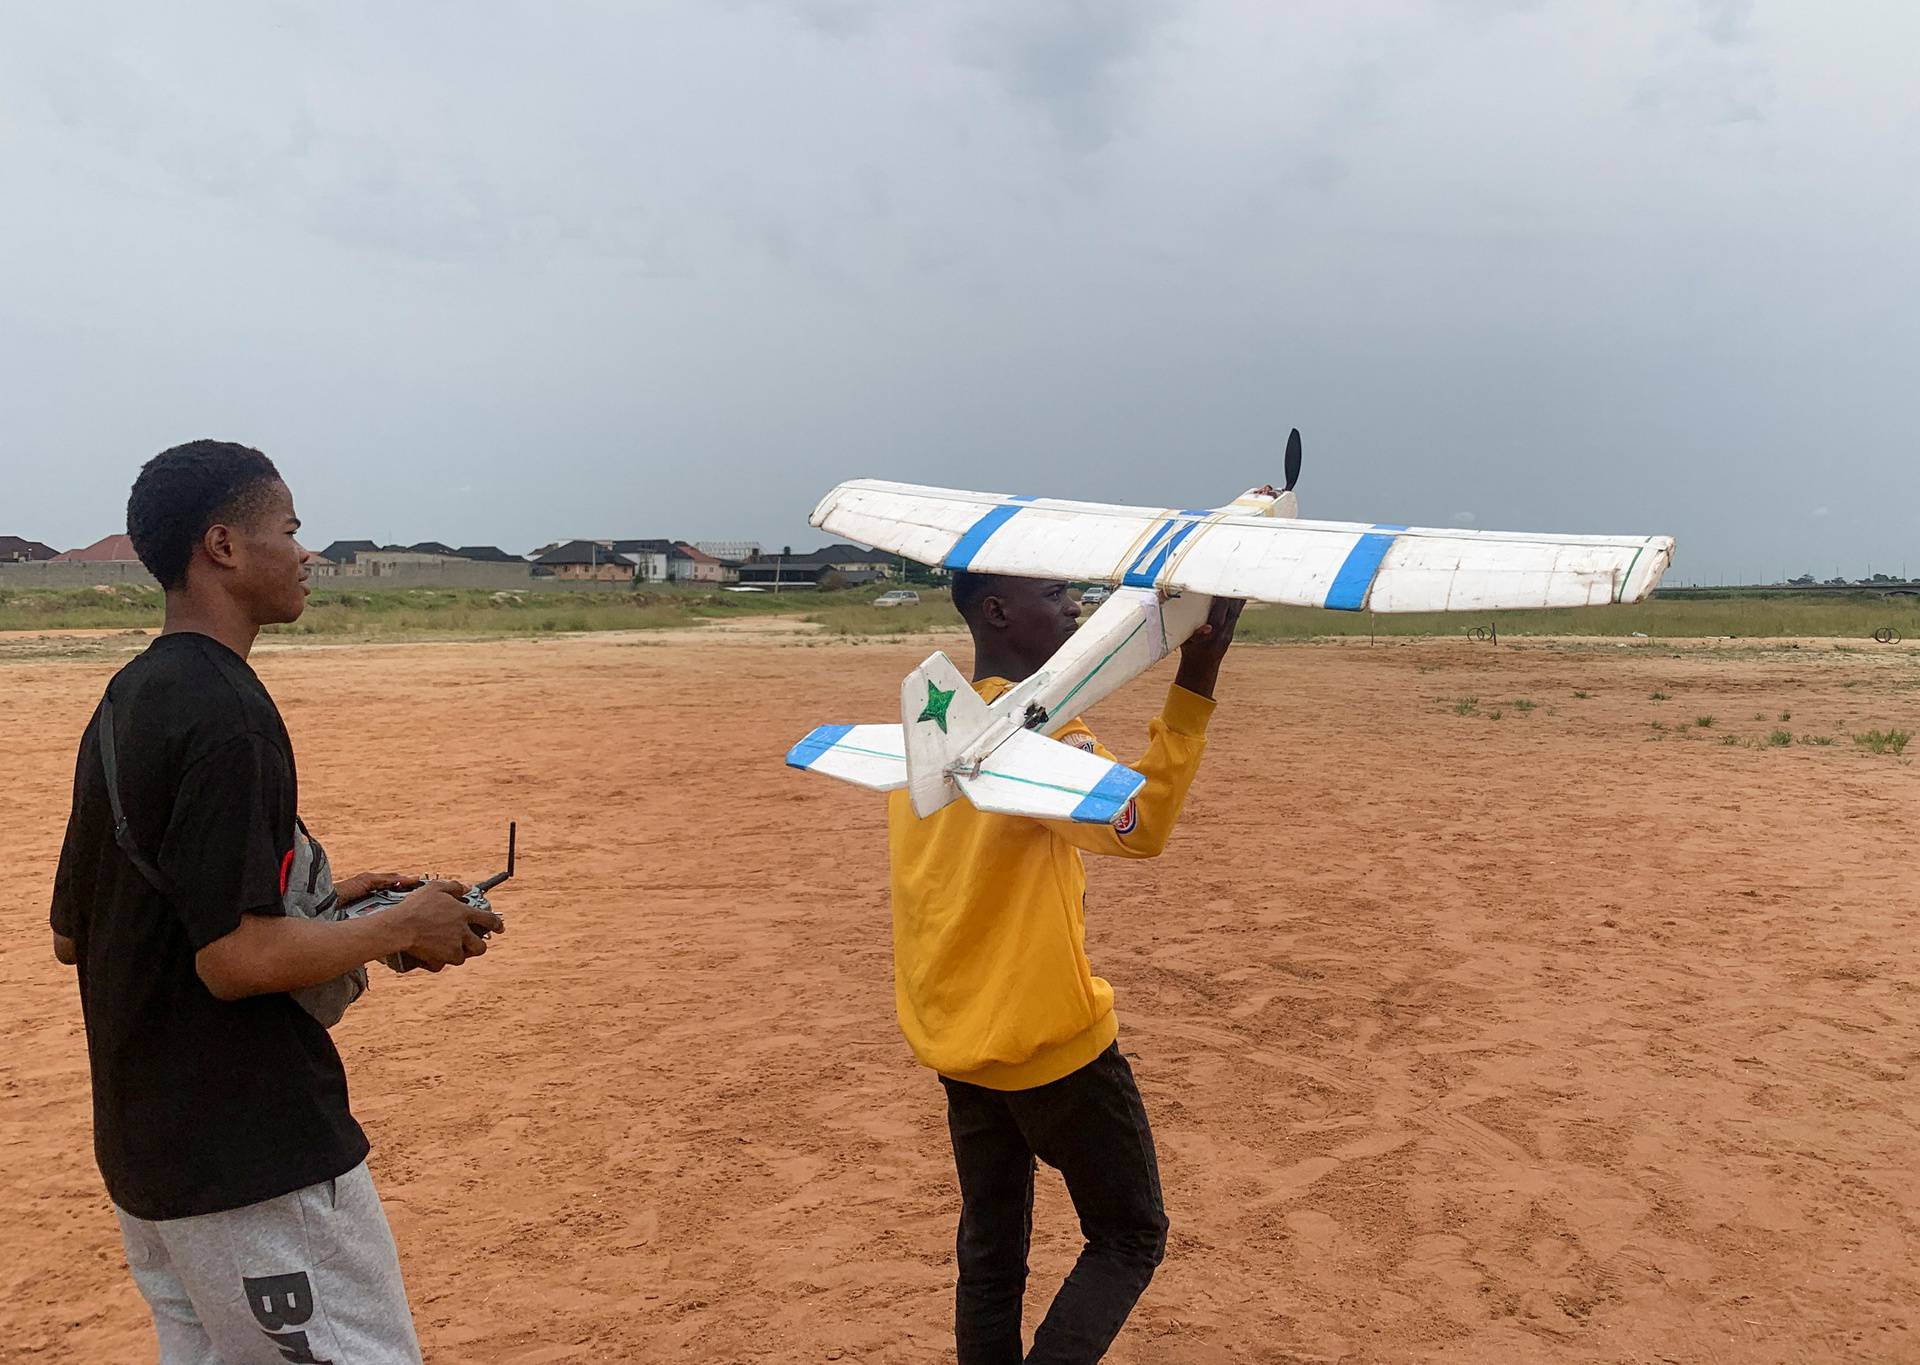 Chris Chinedu and Damilare Ajayi, friends of Bolaji Fatai, who built the model aeroplane from discarded waste, prepare to fly the model aeroplane, in Lagos